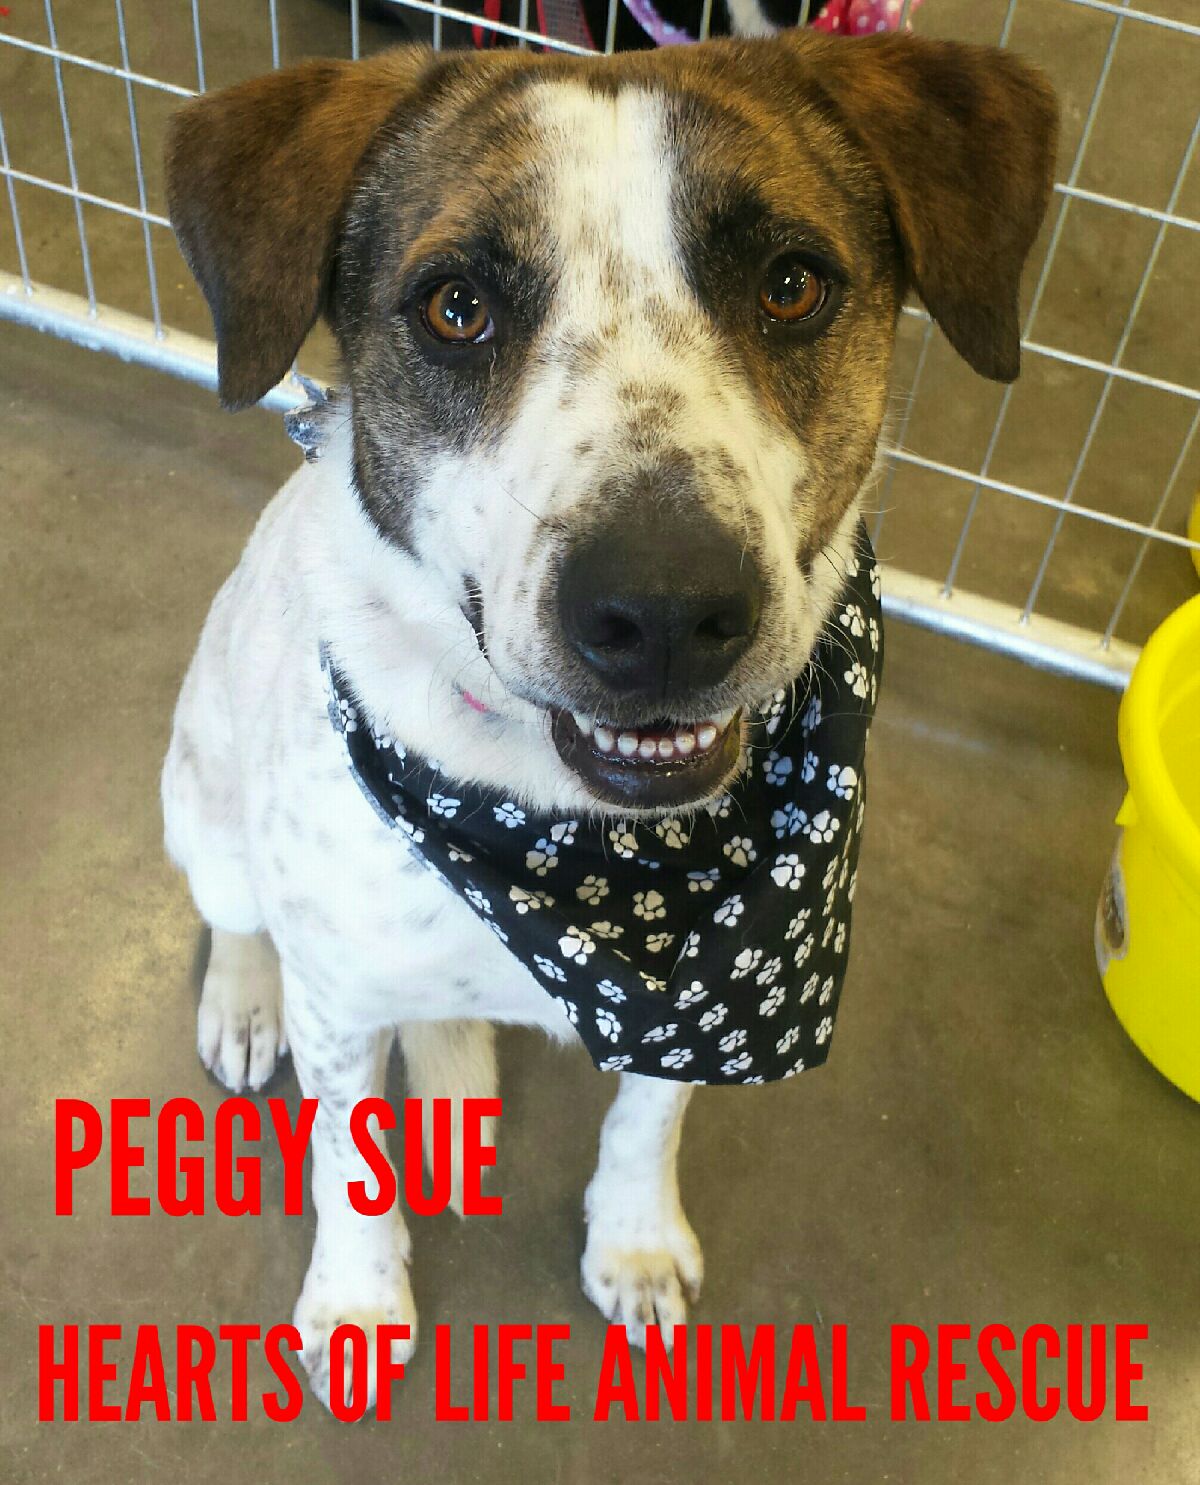 Hearts of Life Animal Rescue Animal of the Week-Meet Peggy Sue!